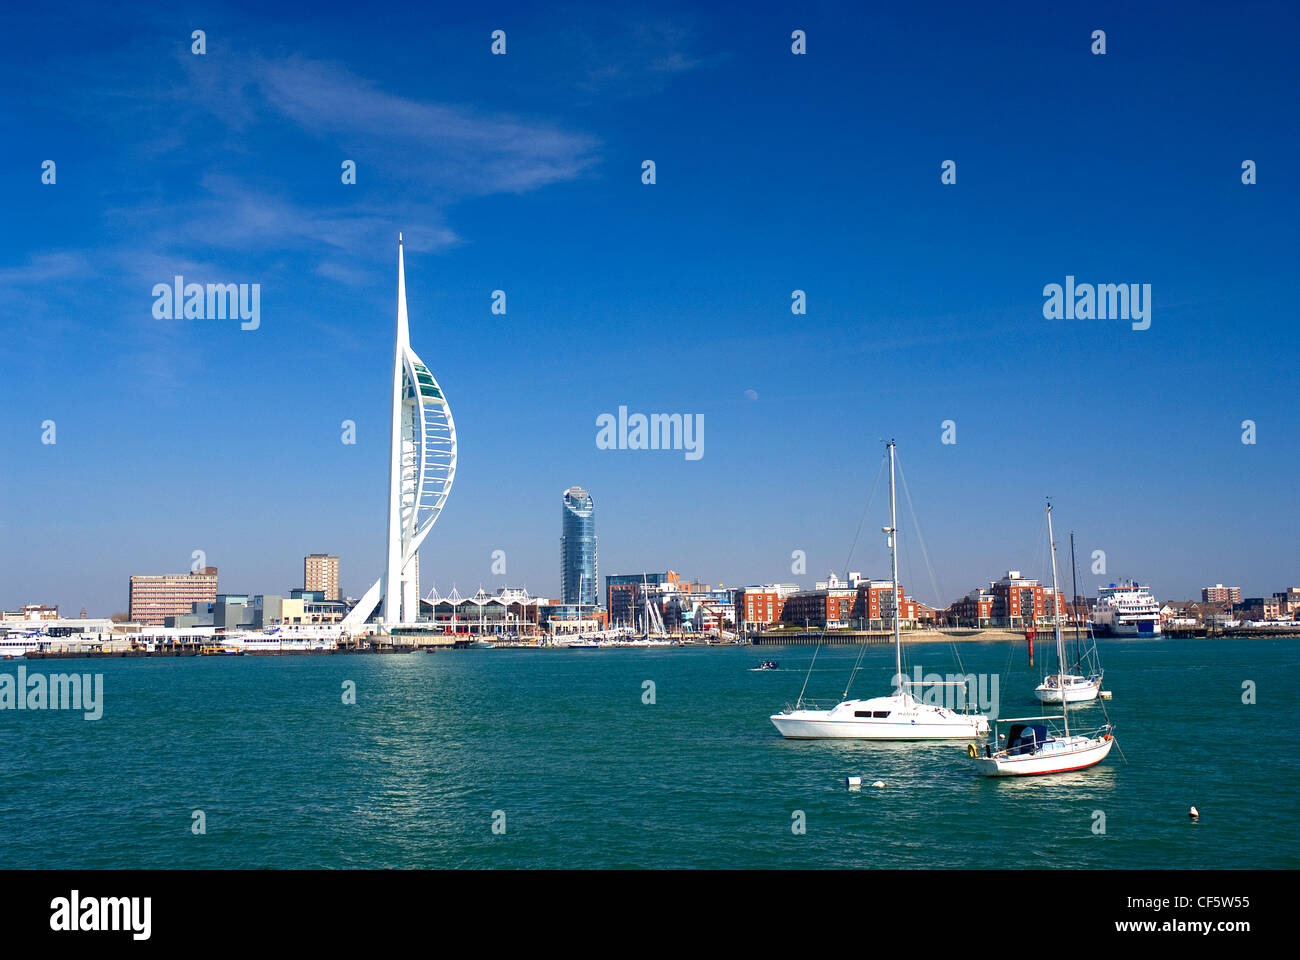 View across Portsmouth Harbour towards the 170m high Spinnaker Tower. Stock Photo